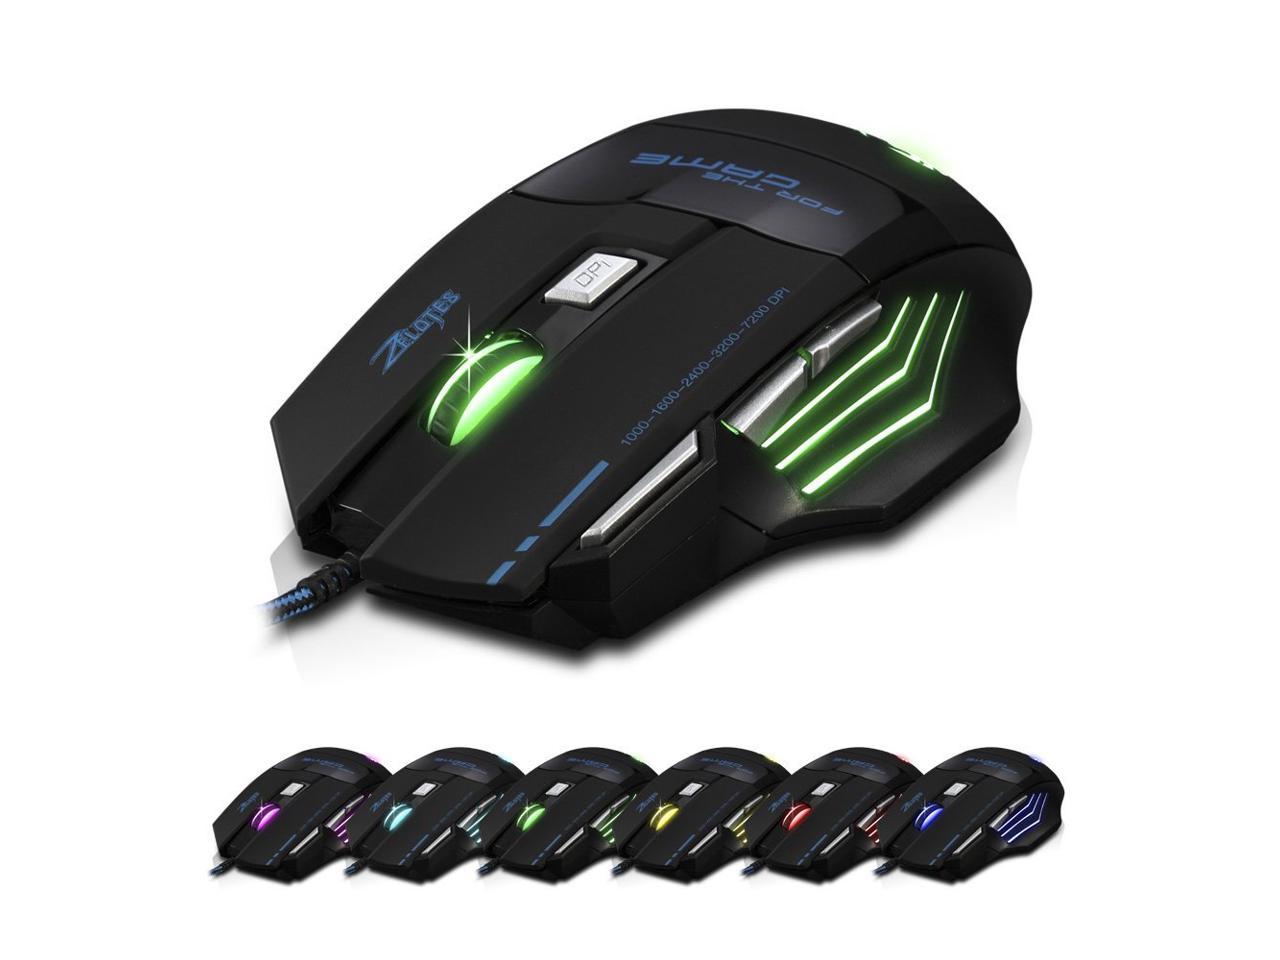 Hot USB Wired X5 3D Optical Gaming Game Mouse Mice 1600 DPI For Laptop PC 